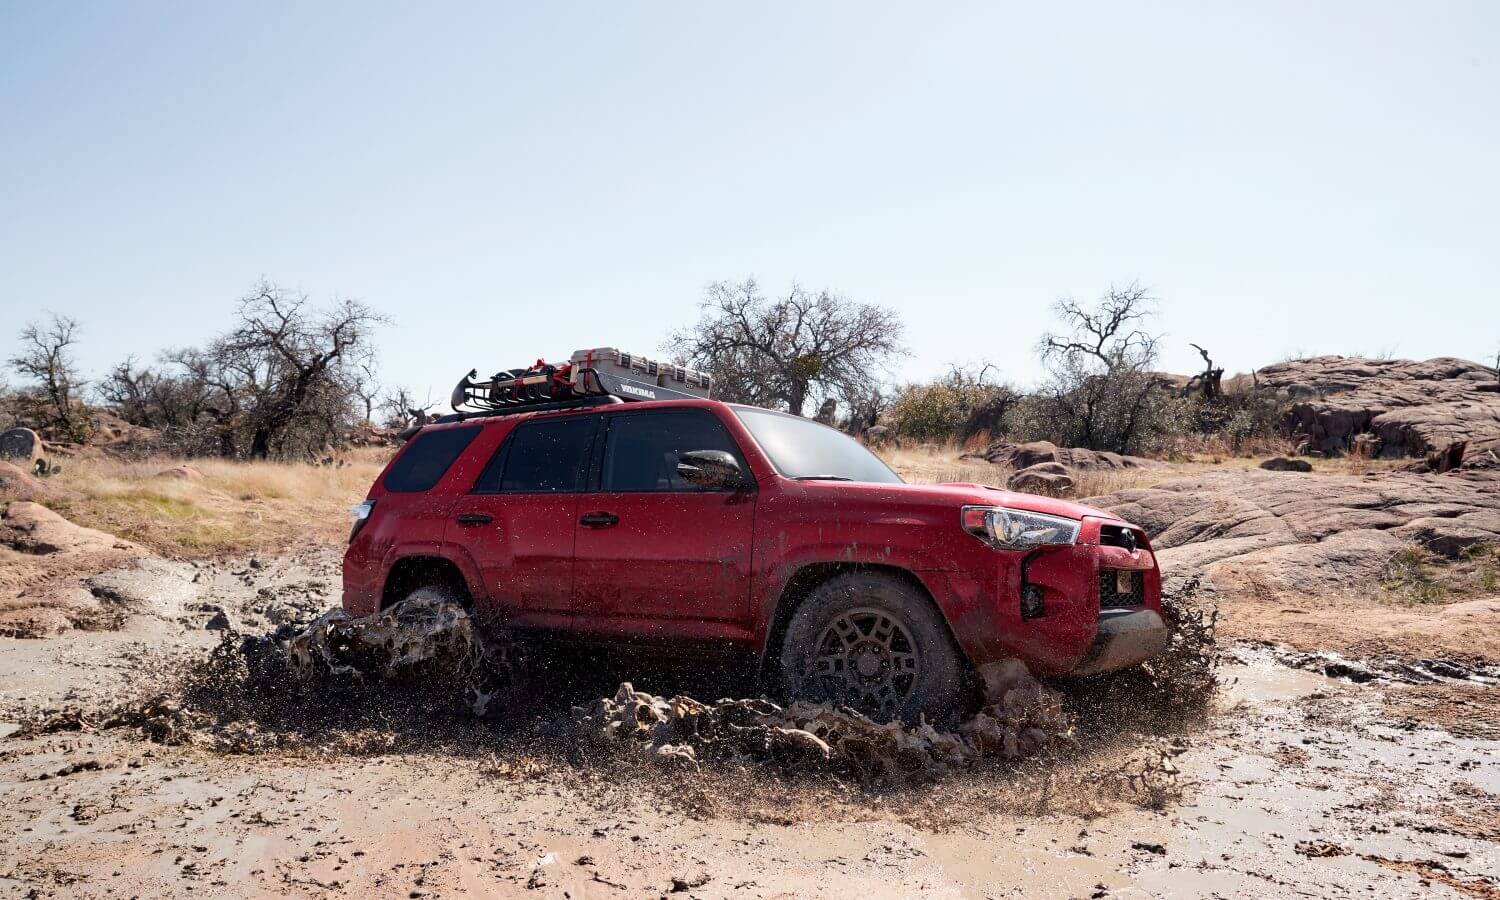 01 2020 Toyota 4Runner Venture Edition Red Mud Off Road